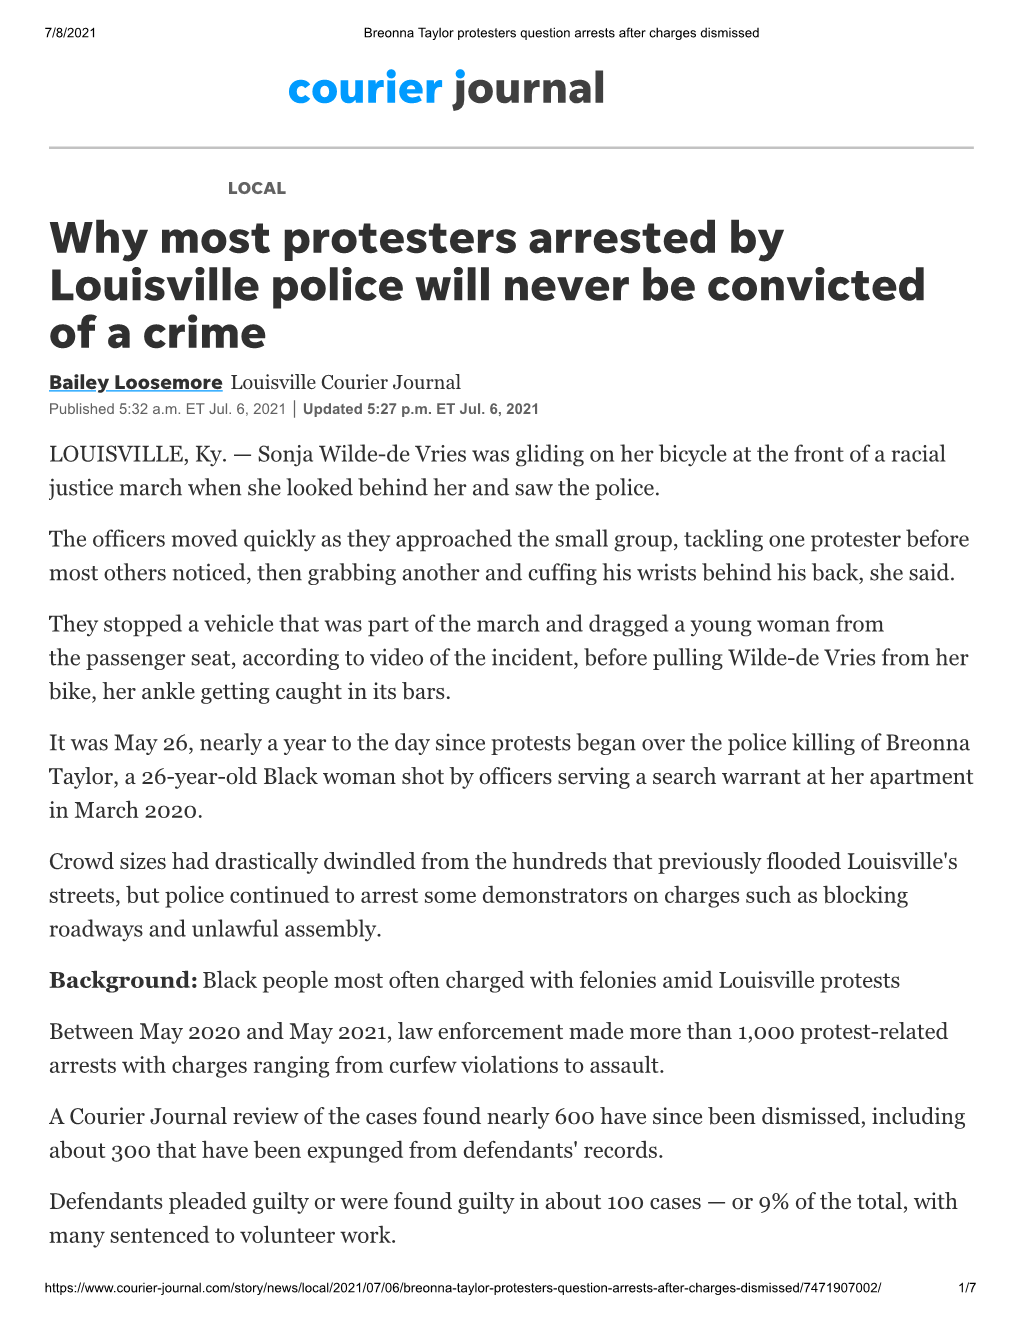 Why Most Protesters Arrested by Louisville Police Will Never Be Convicted of a Crime Bailey Loosemore Louisville Courier Journal Published 5:32 A.M